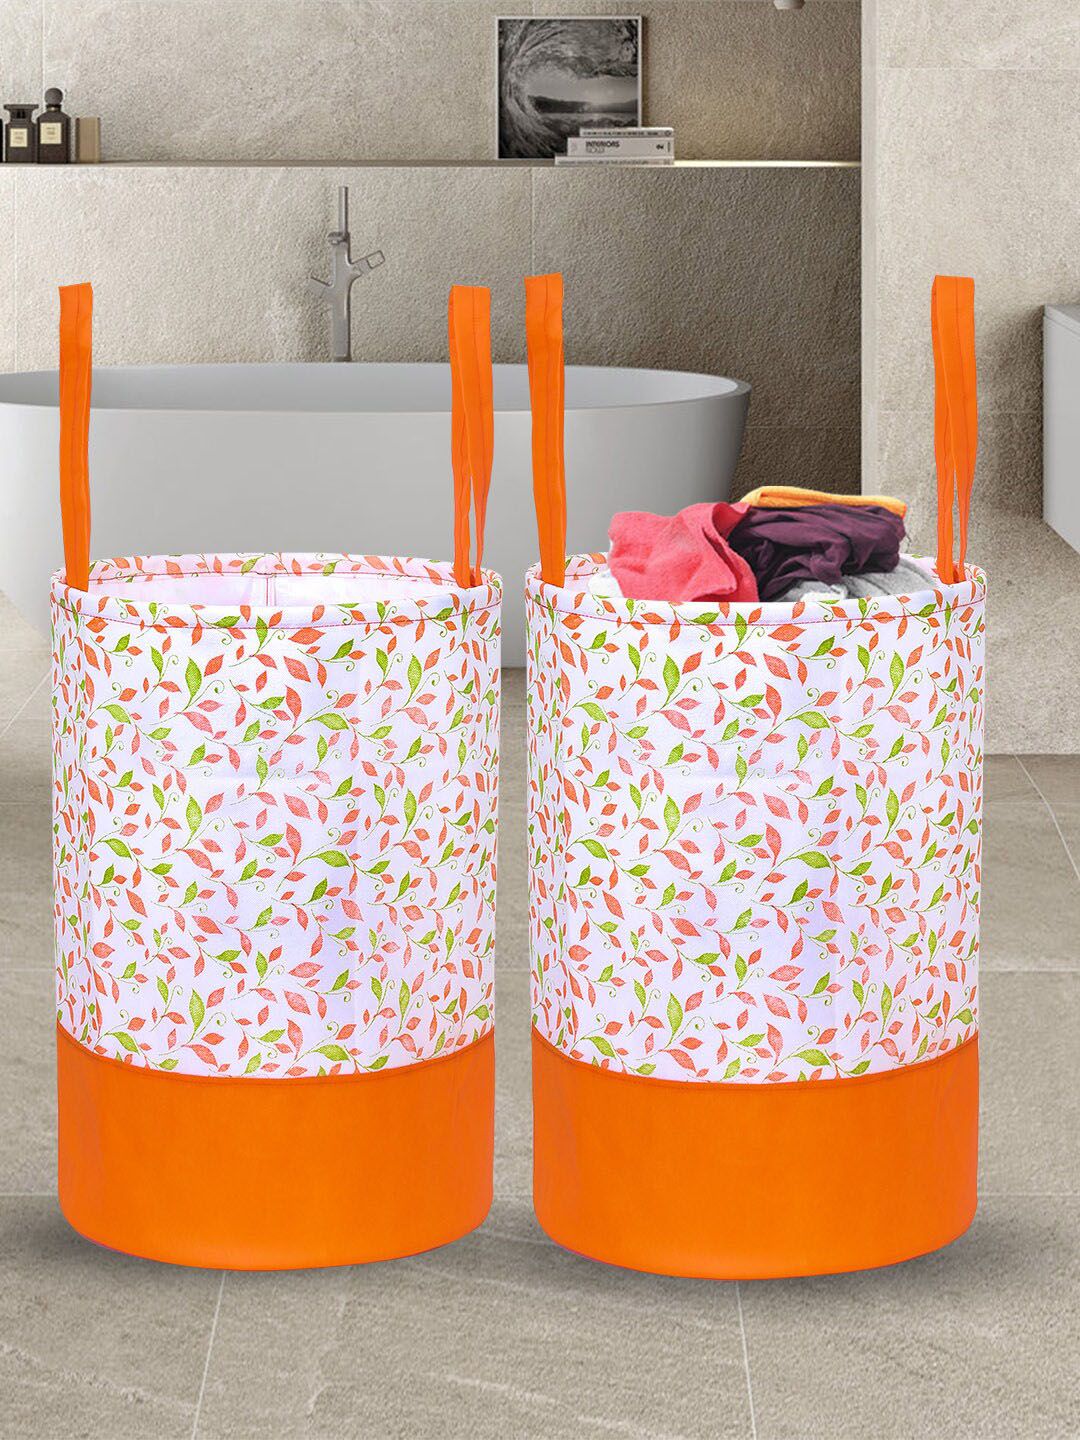 prettykrafts Orange & White Set of 2 Printed Round Foldable Laundry Baskets Price in India